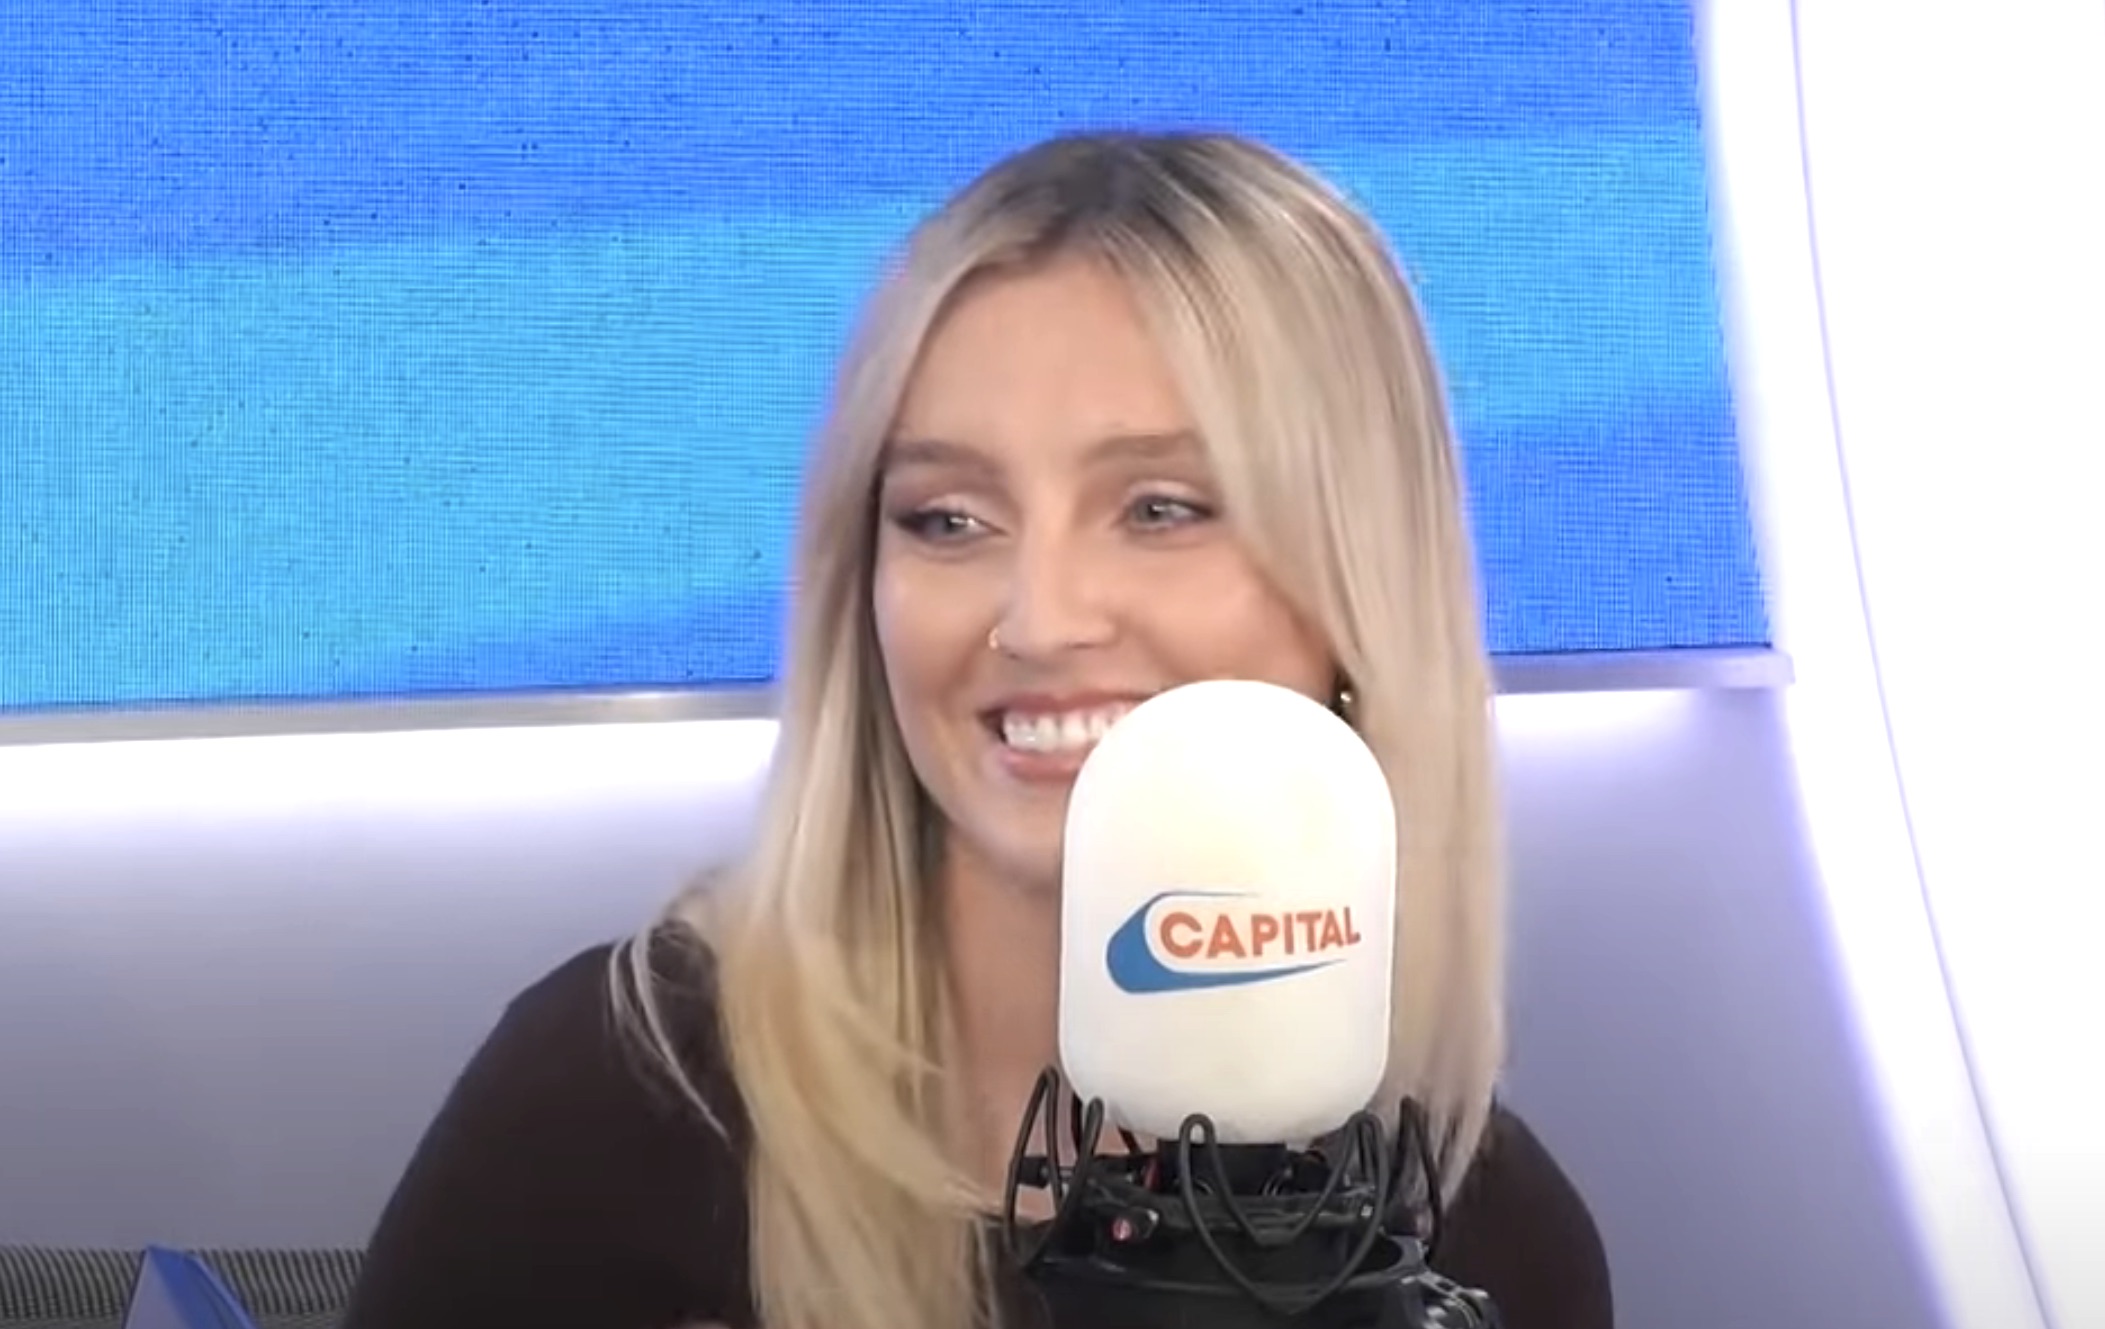 Perrie Edwards Talks New Single ‘Forget About Us,’ Debut Solo Album, Missing Little Mix, & More